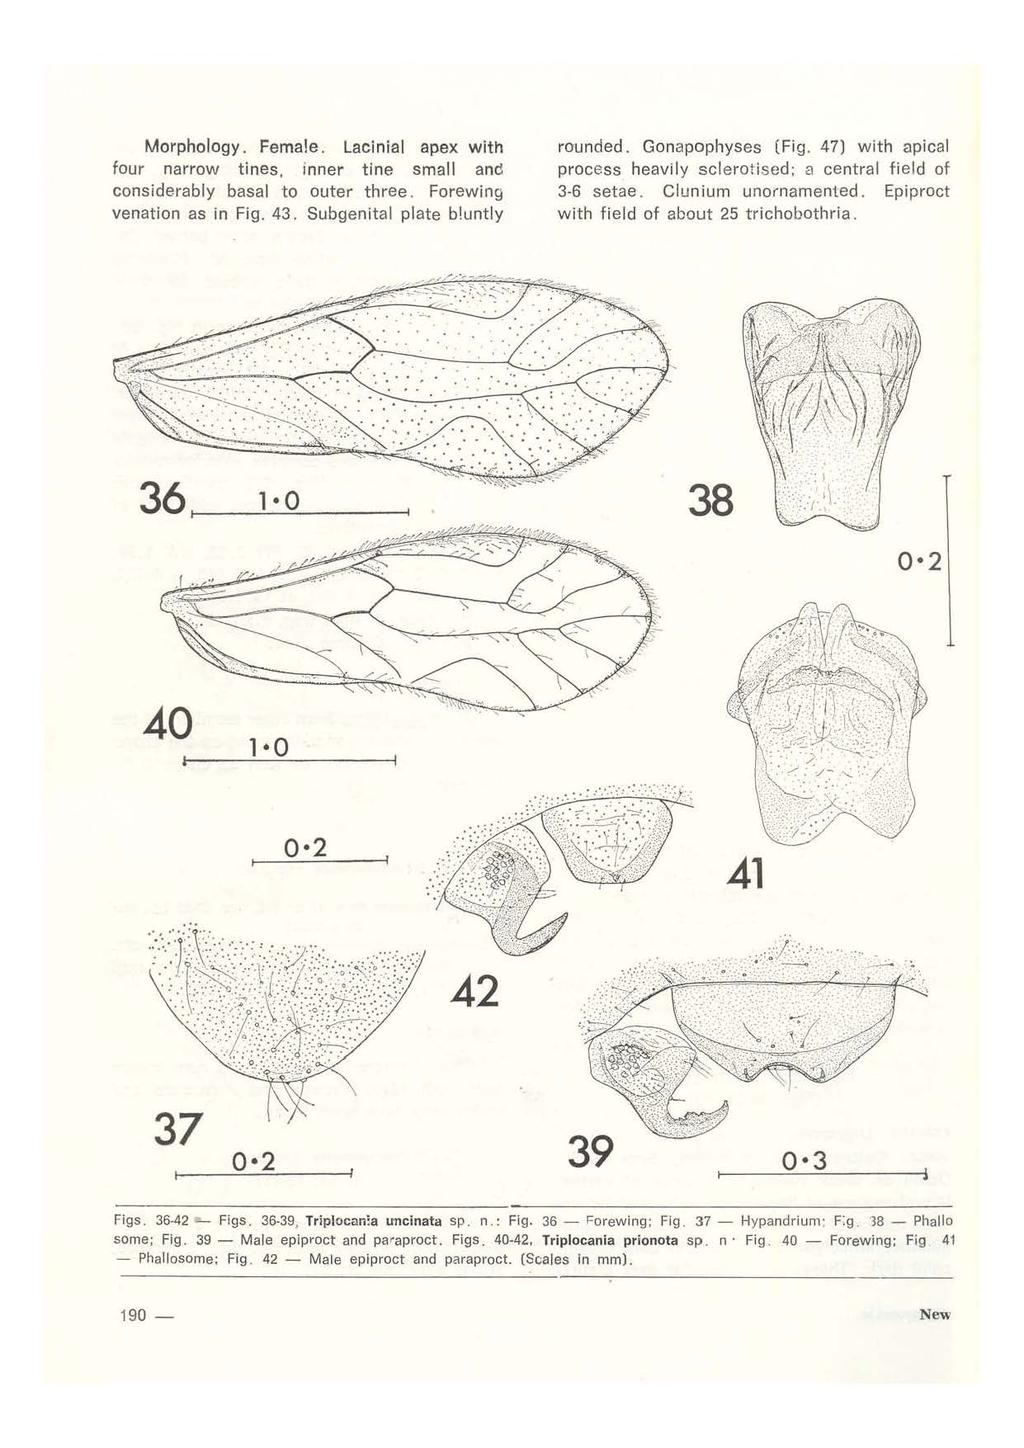 Morphology. Female. Lacinial apex with four narrow tines, inner tine small and considerably basal to outer three. Forewing venation as in Fig. 43. Subgenital plate b!untly rounded. Gonapophyses (Fig.